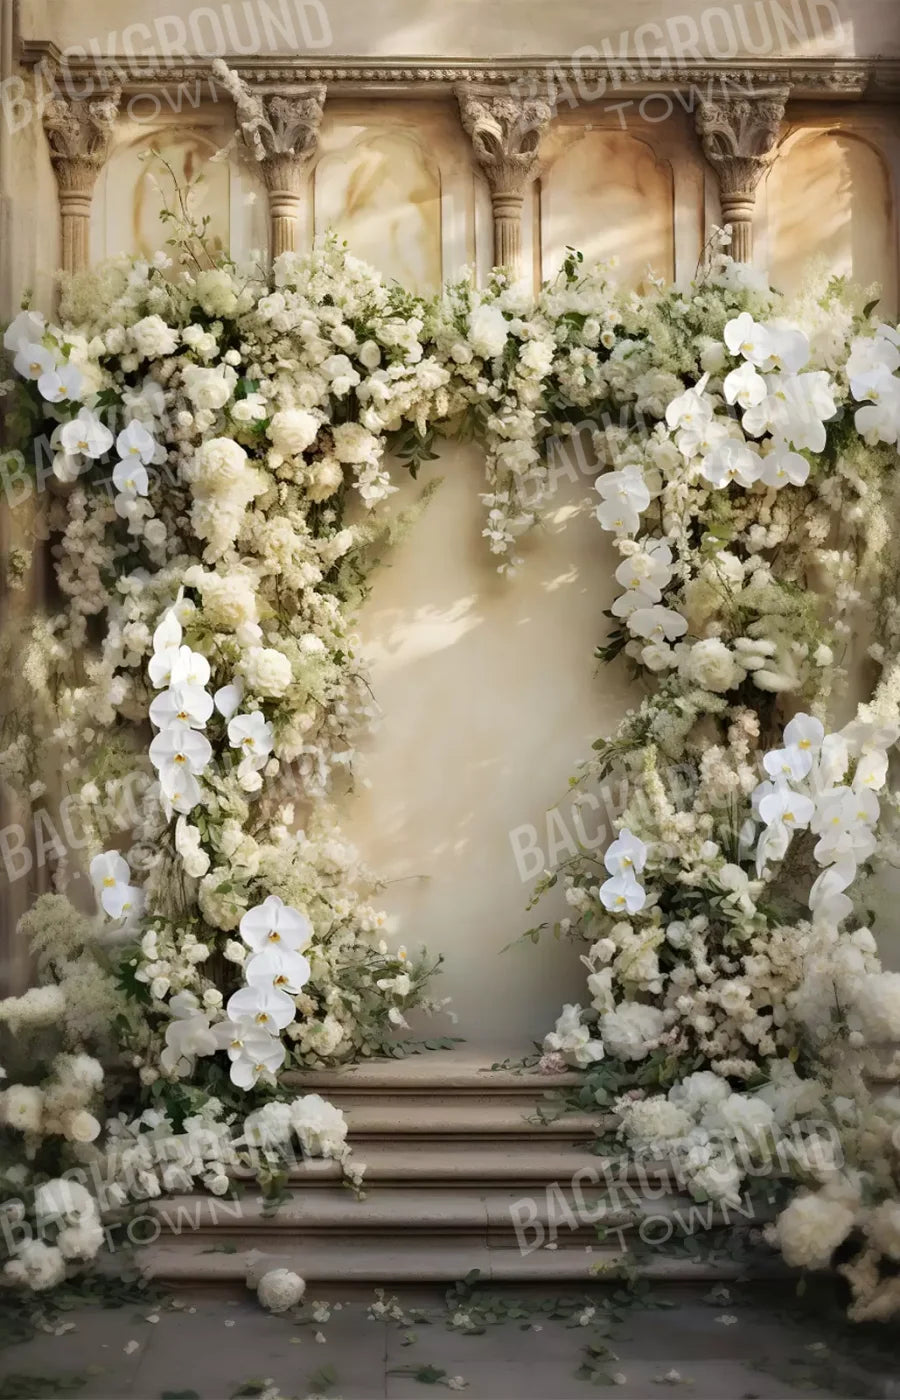 White Floral Arch 9X14 Ultracloth ( 108 X 168 Inch ) Backdrop